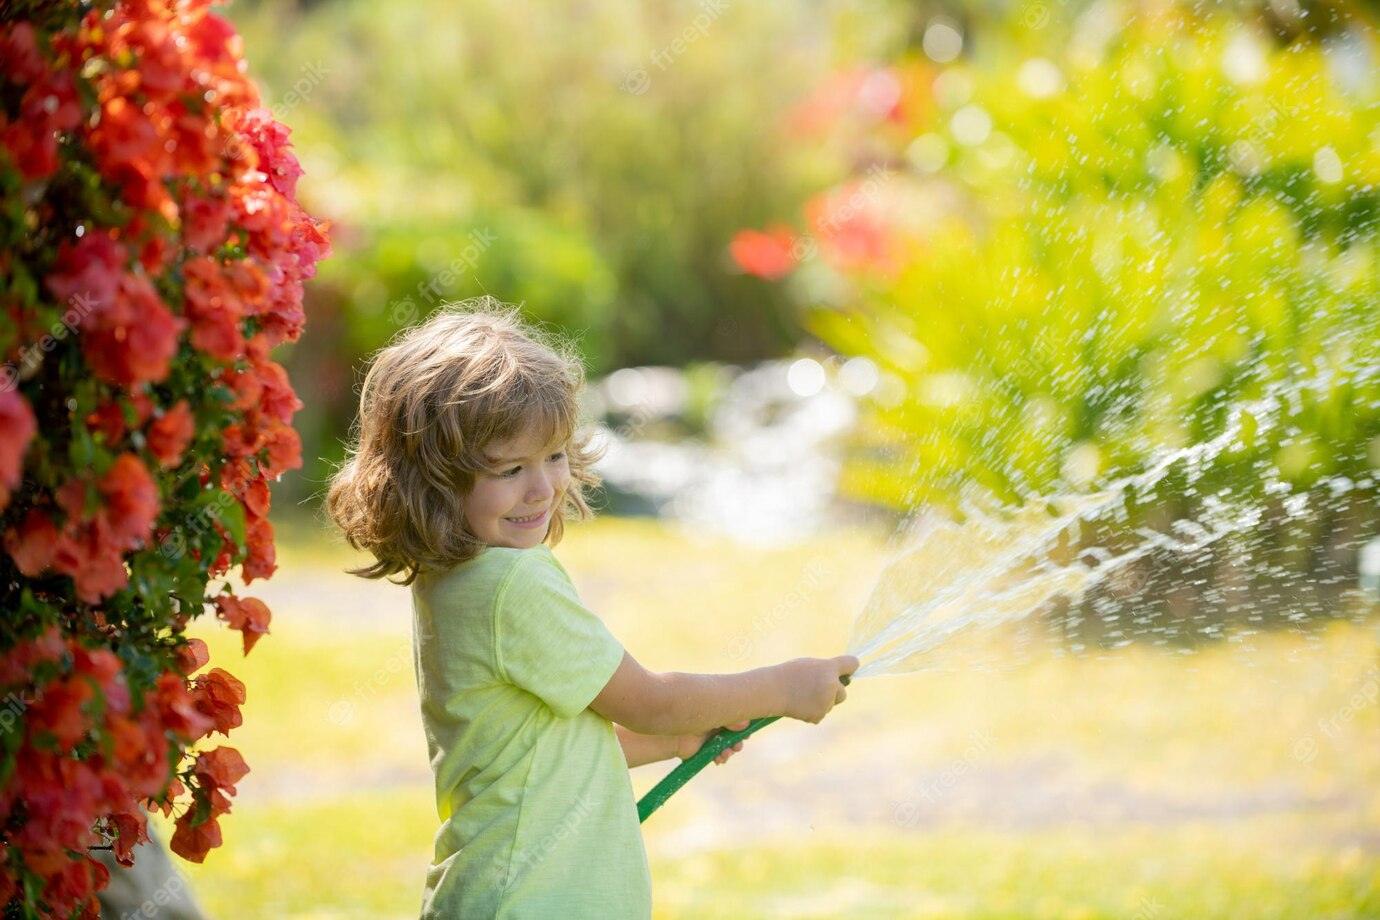 Garden Hose Accessories: What You Need and What You Don't - Lazy Pro